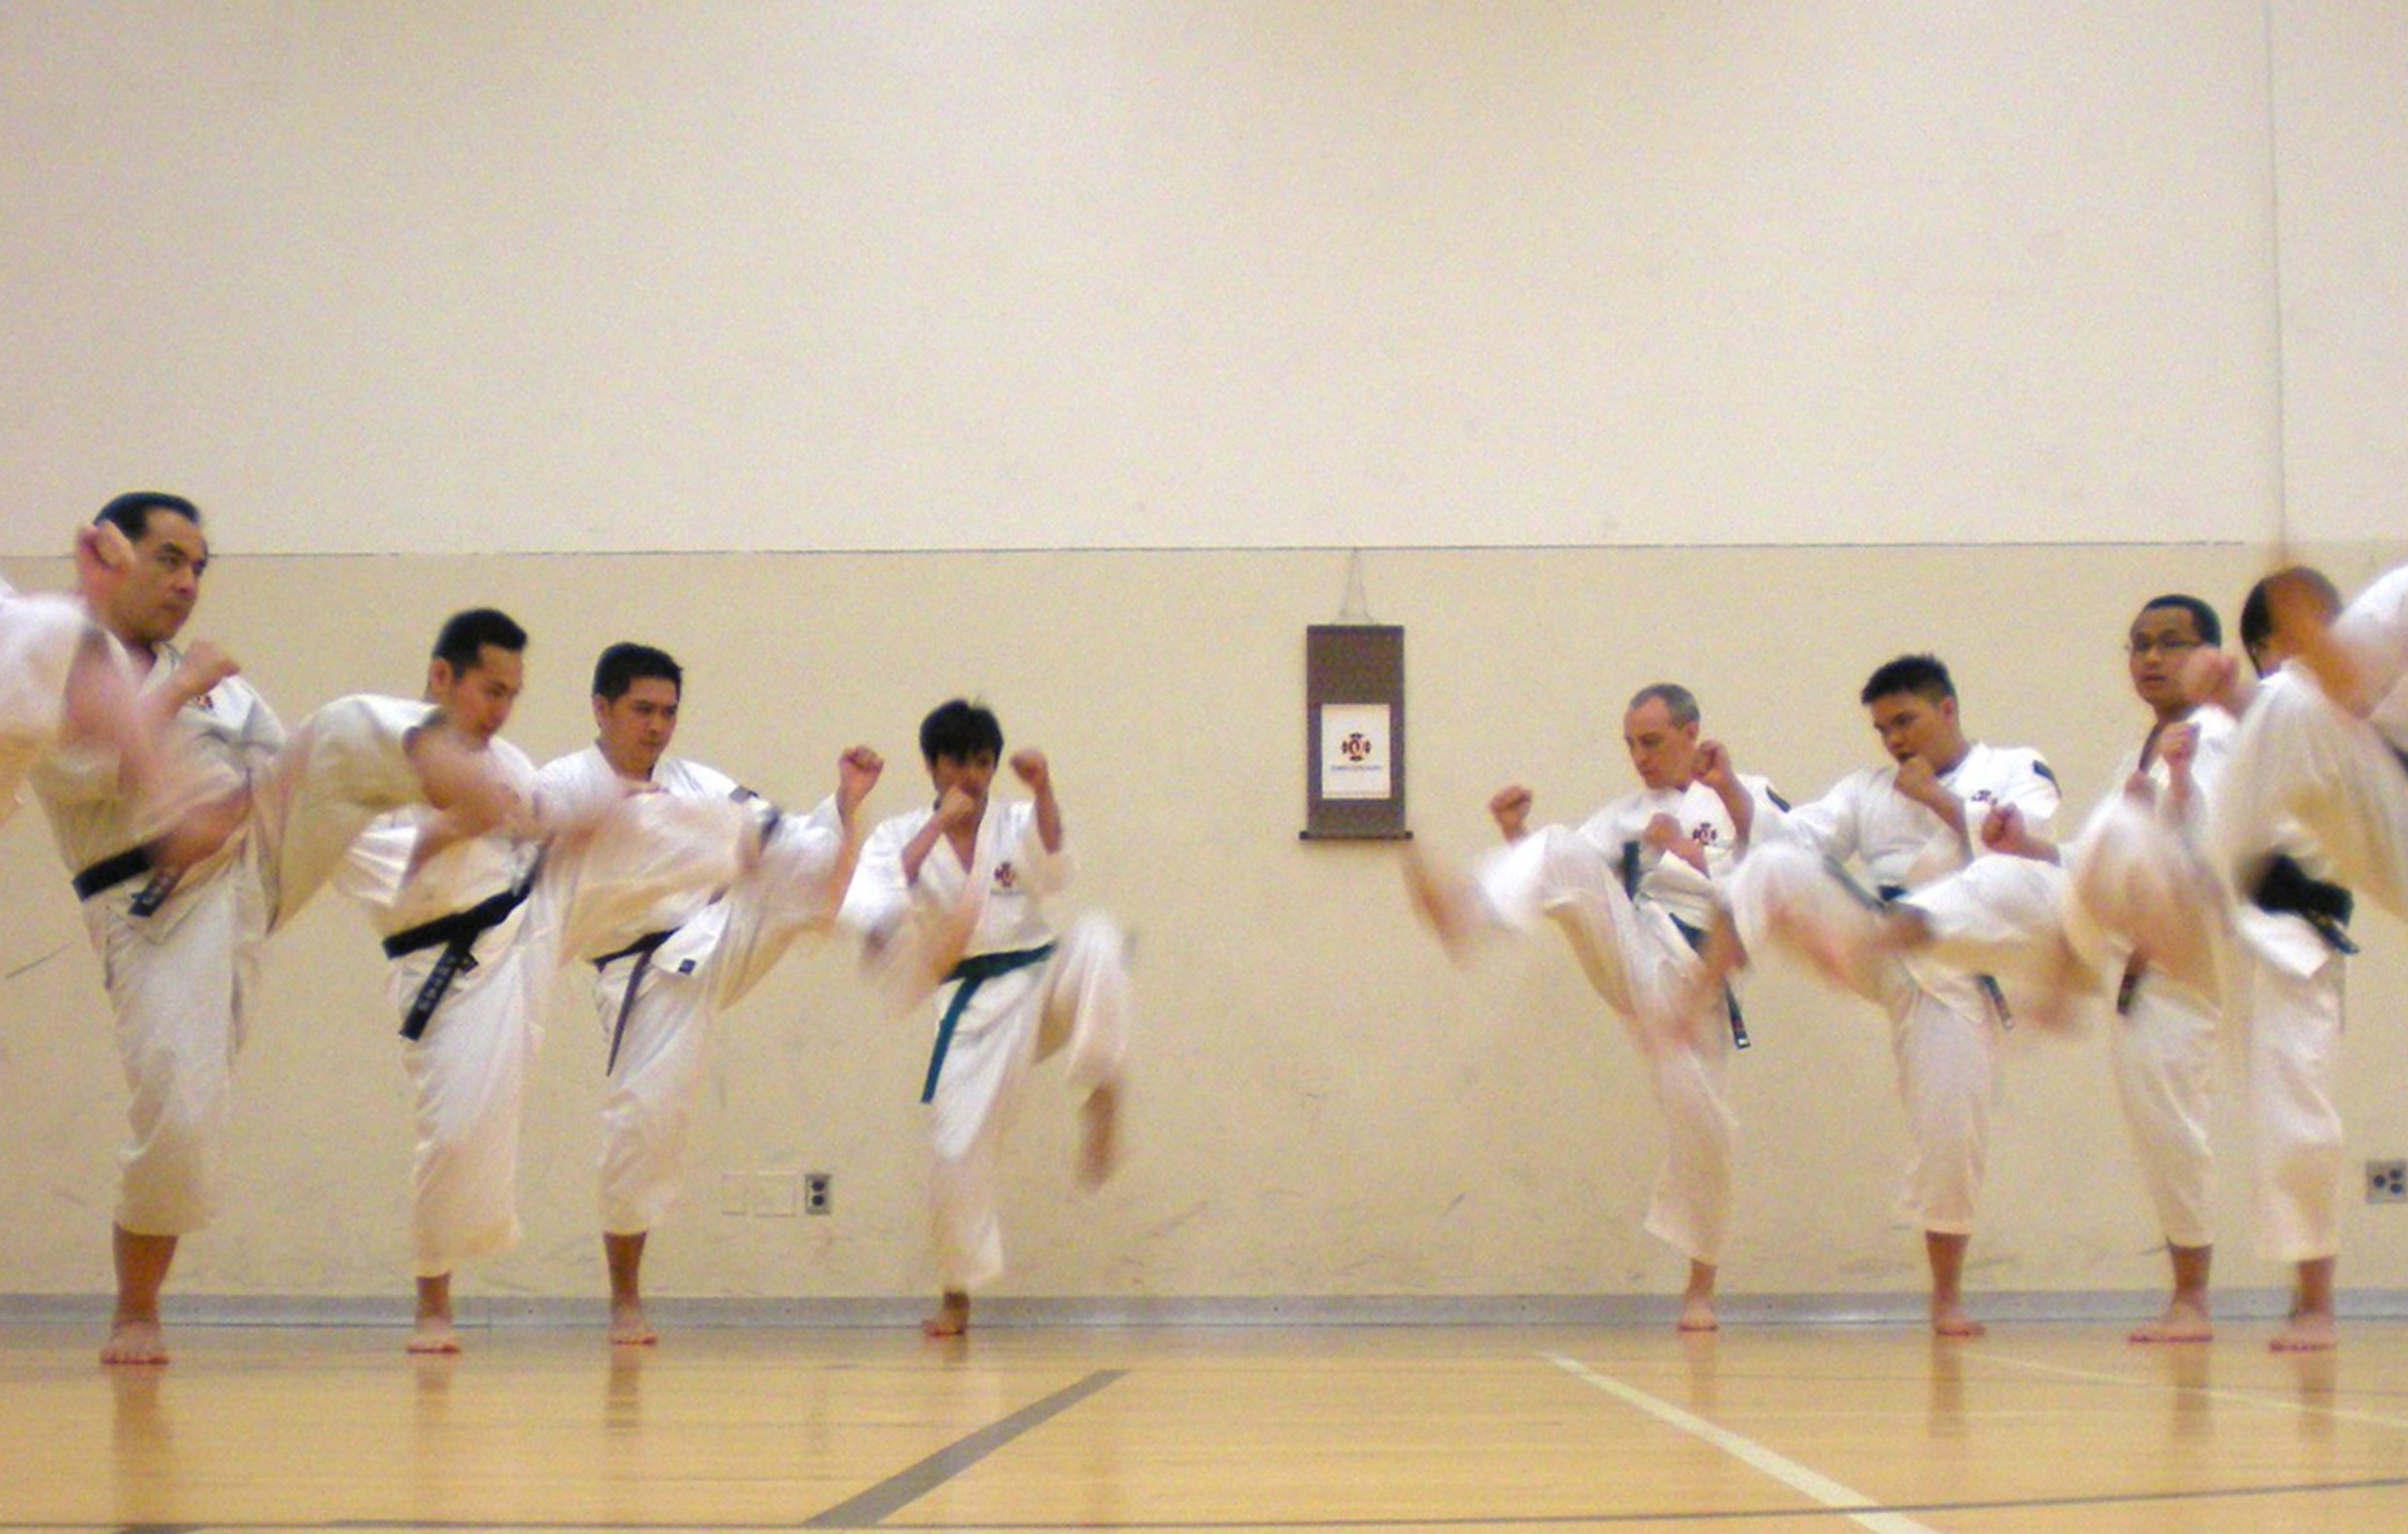 People in a row doing karate